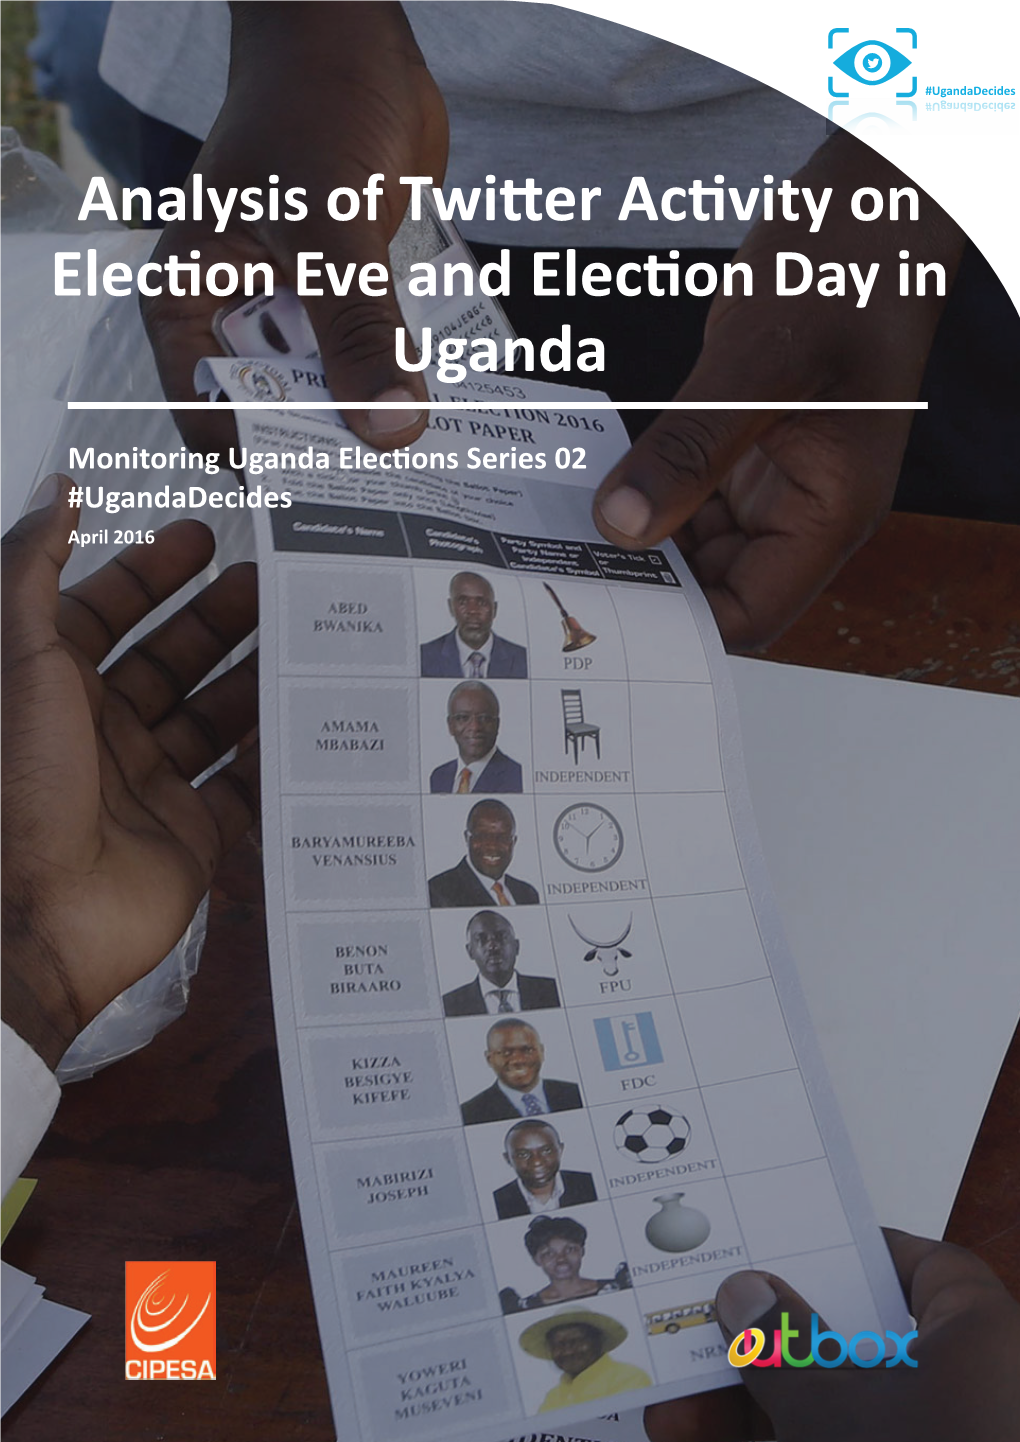 Analysis of Twitter Activity on Election Eve and Election Day in Uganda